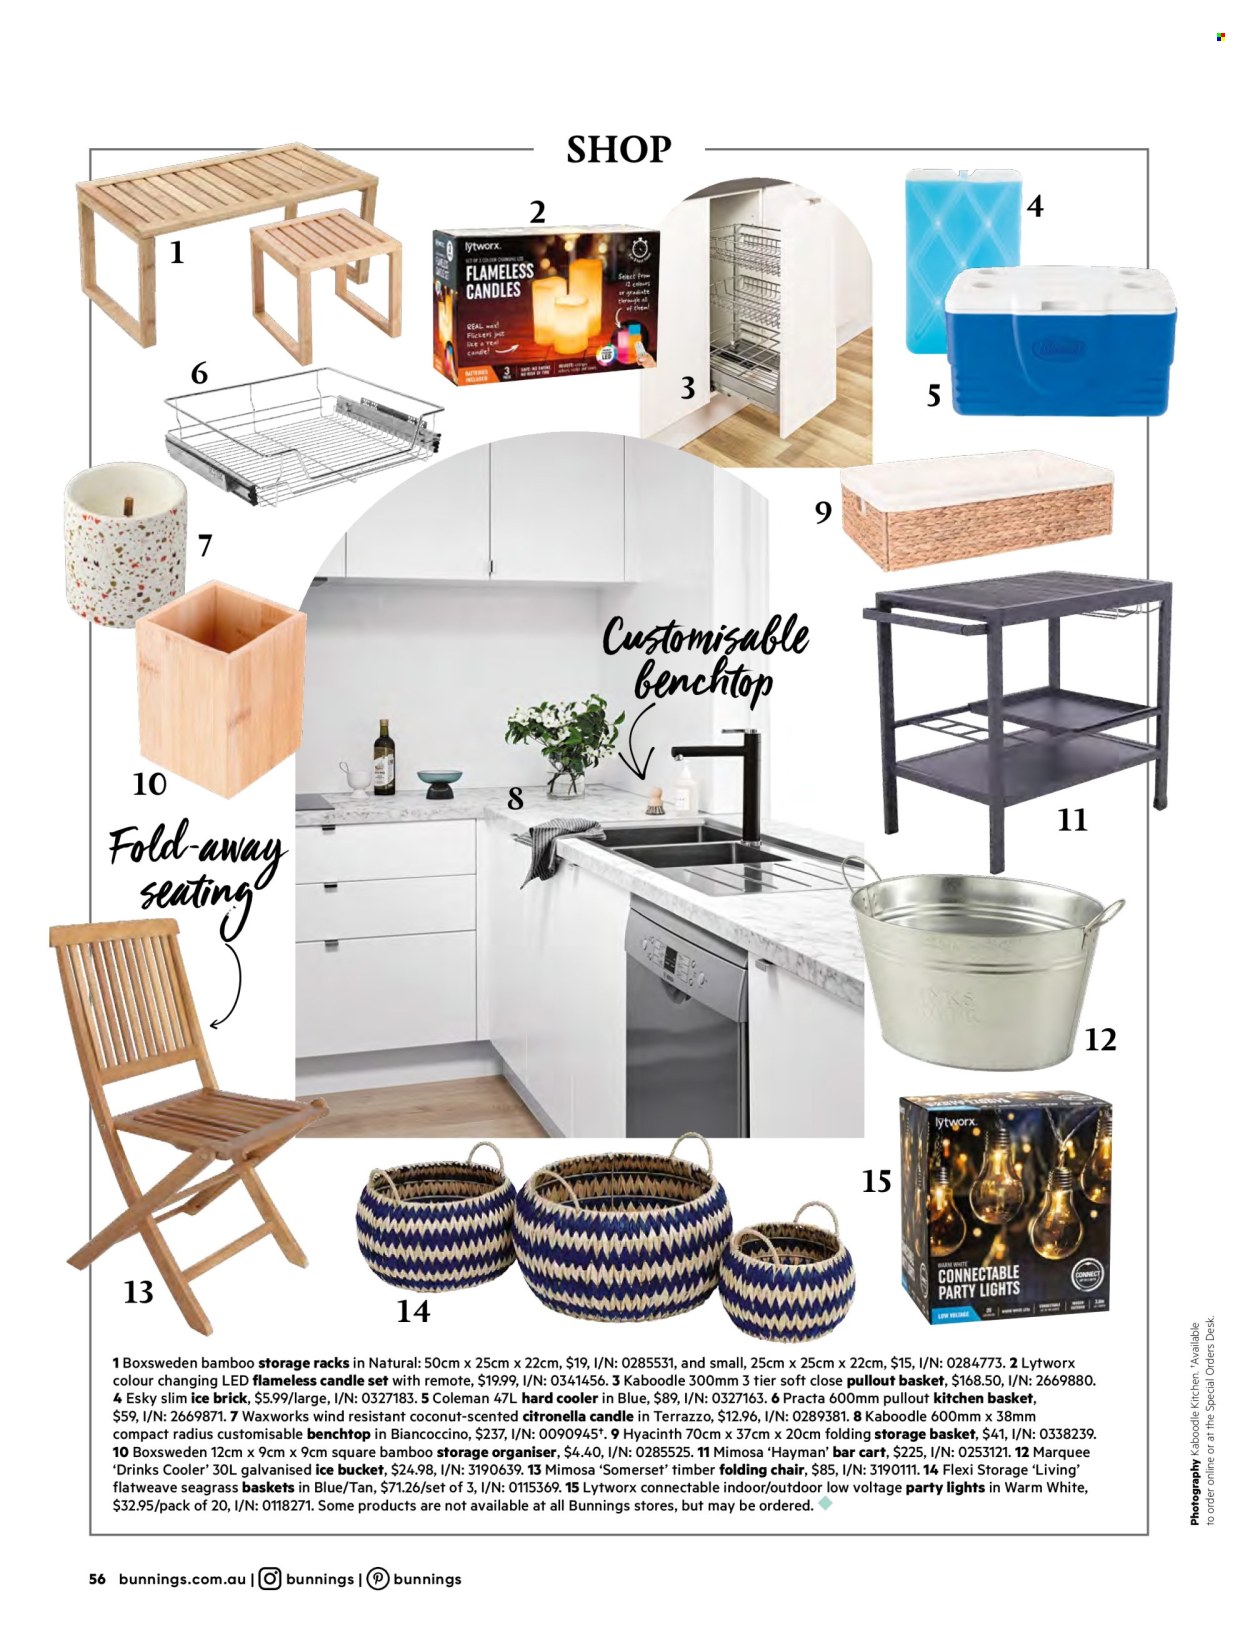 thumbnail - Bunnings Warehouse Catalogue - Sales products - chair, desk, folding chair, candle, storage basket, brick, cart, basket. Page 56.